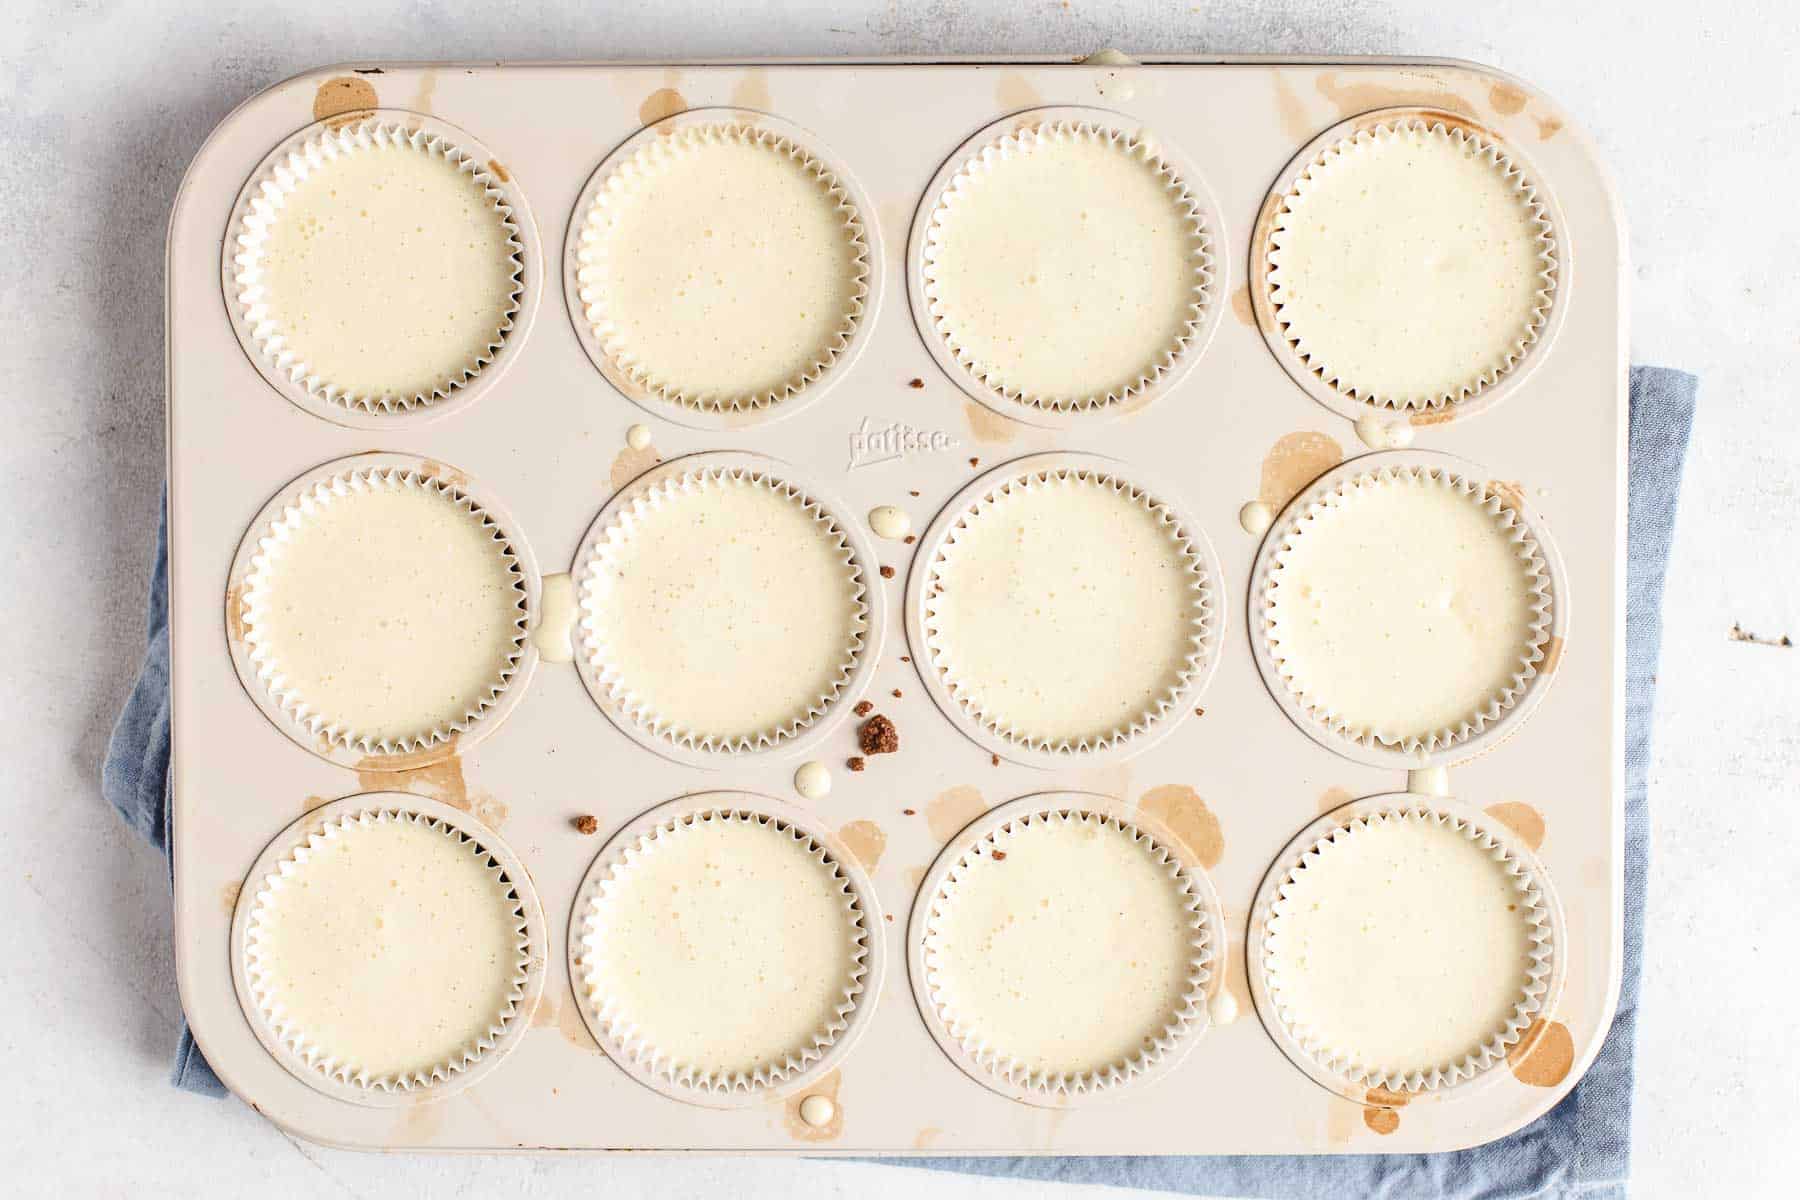 muffin pan filled with cheesecake batter ready to bake